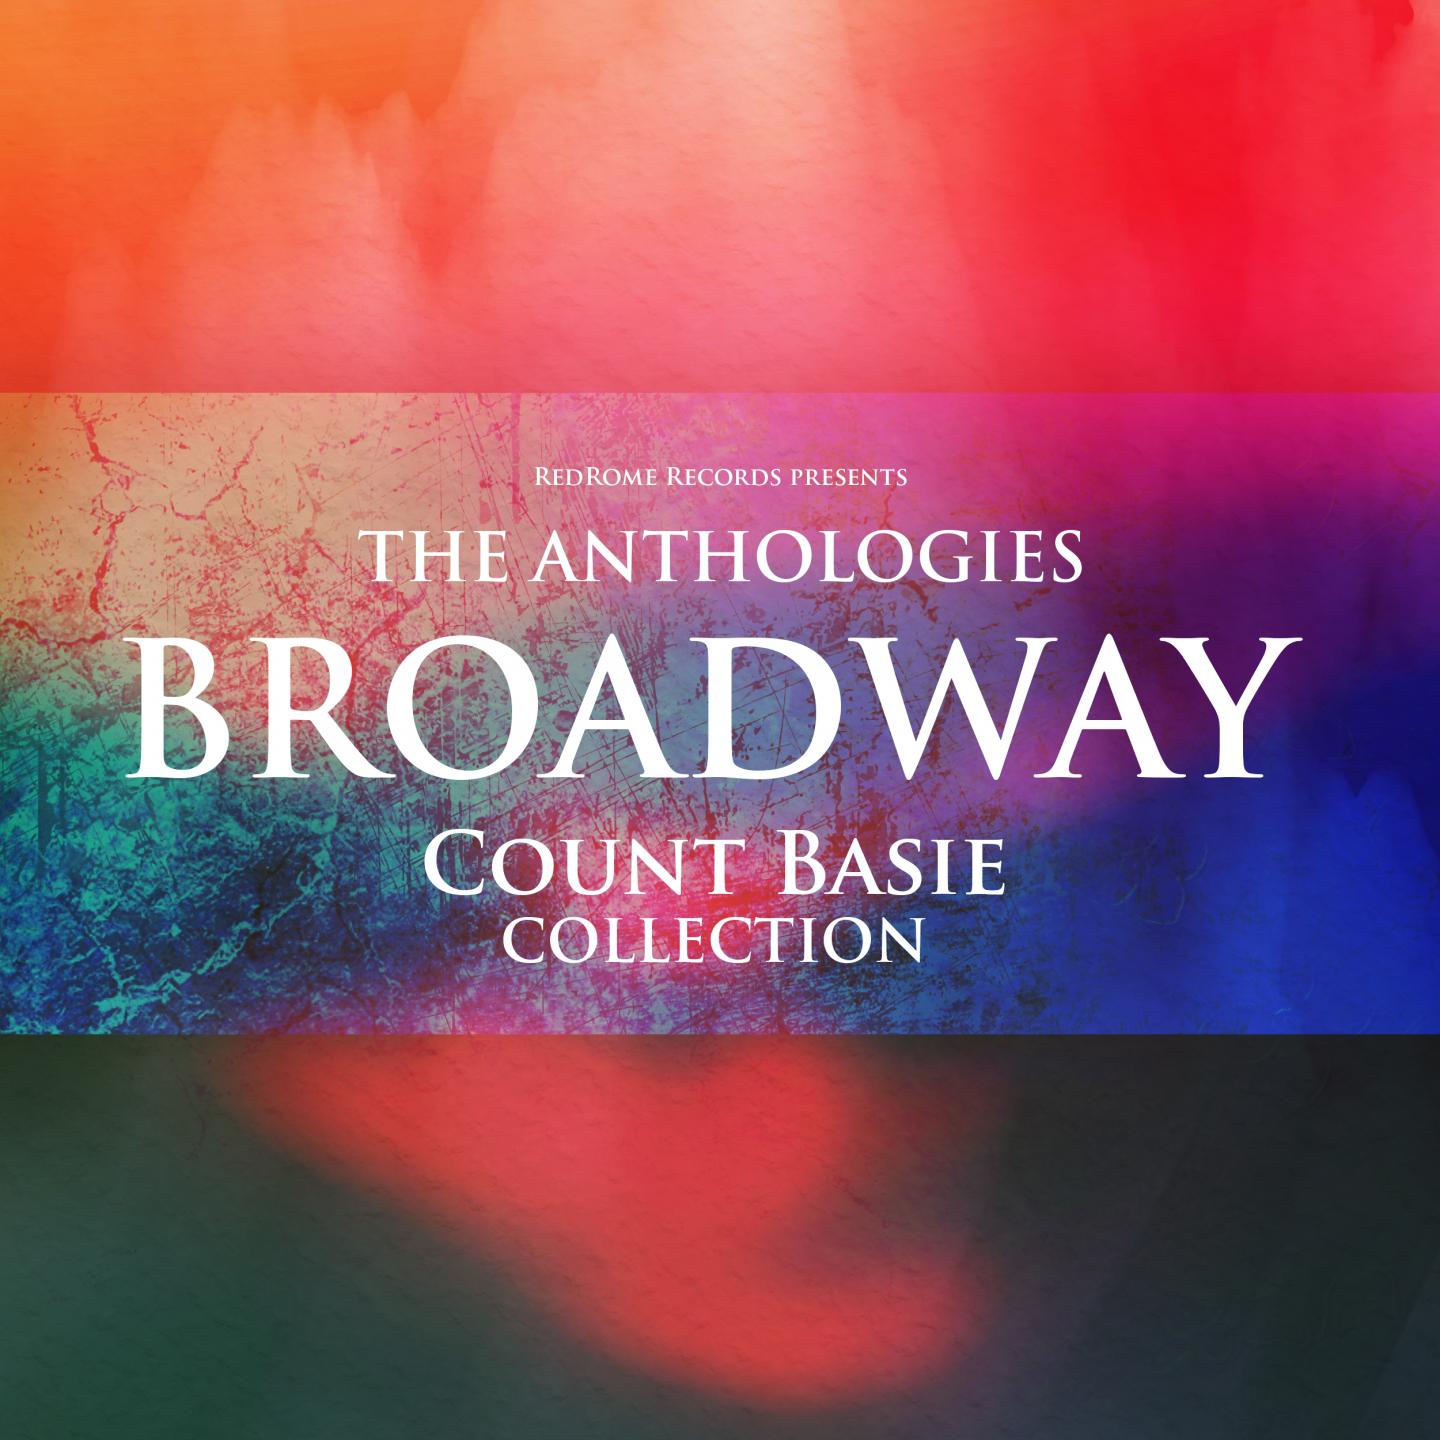 The Anthologies: Broadway (Count Basie Collection)